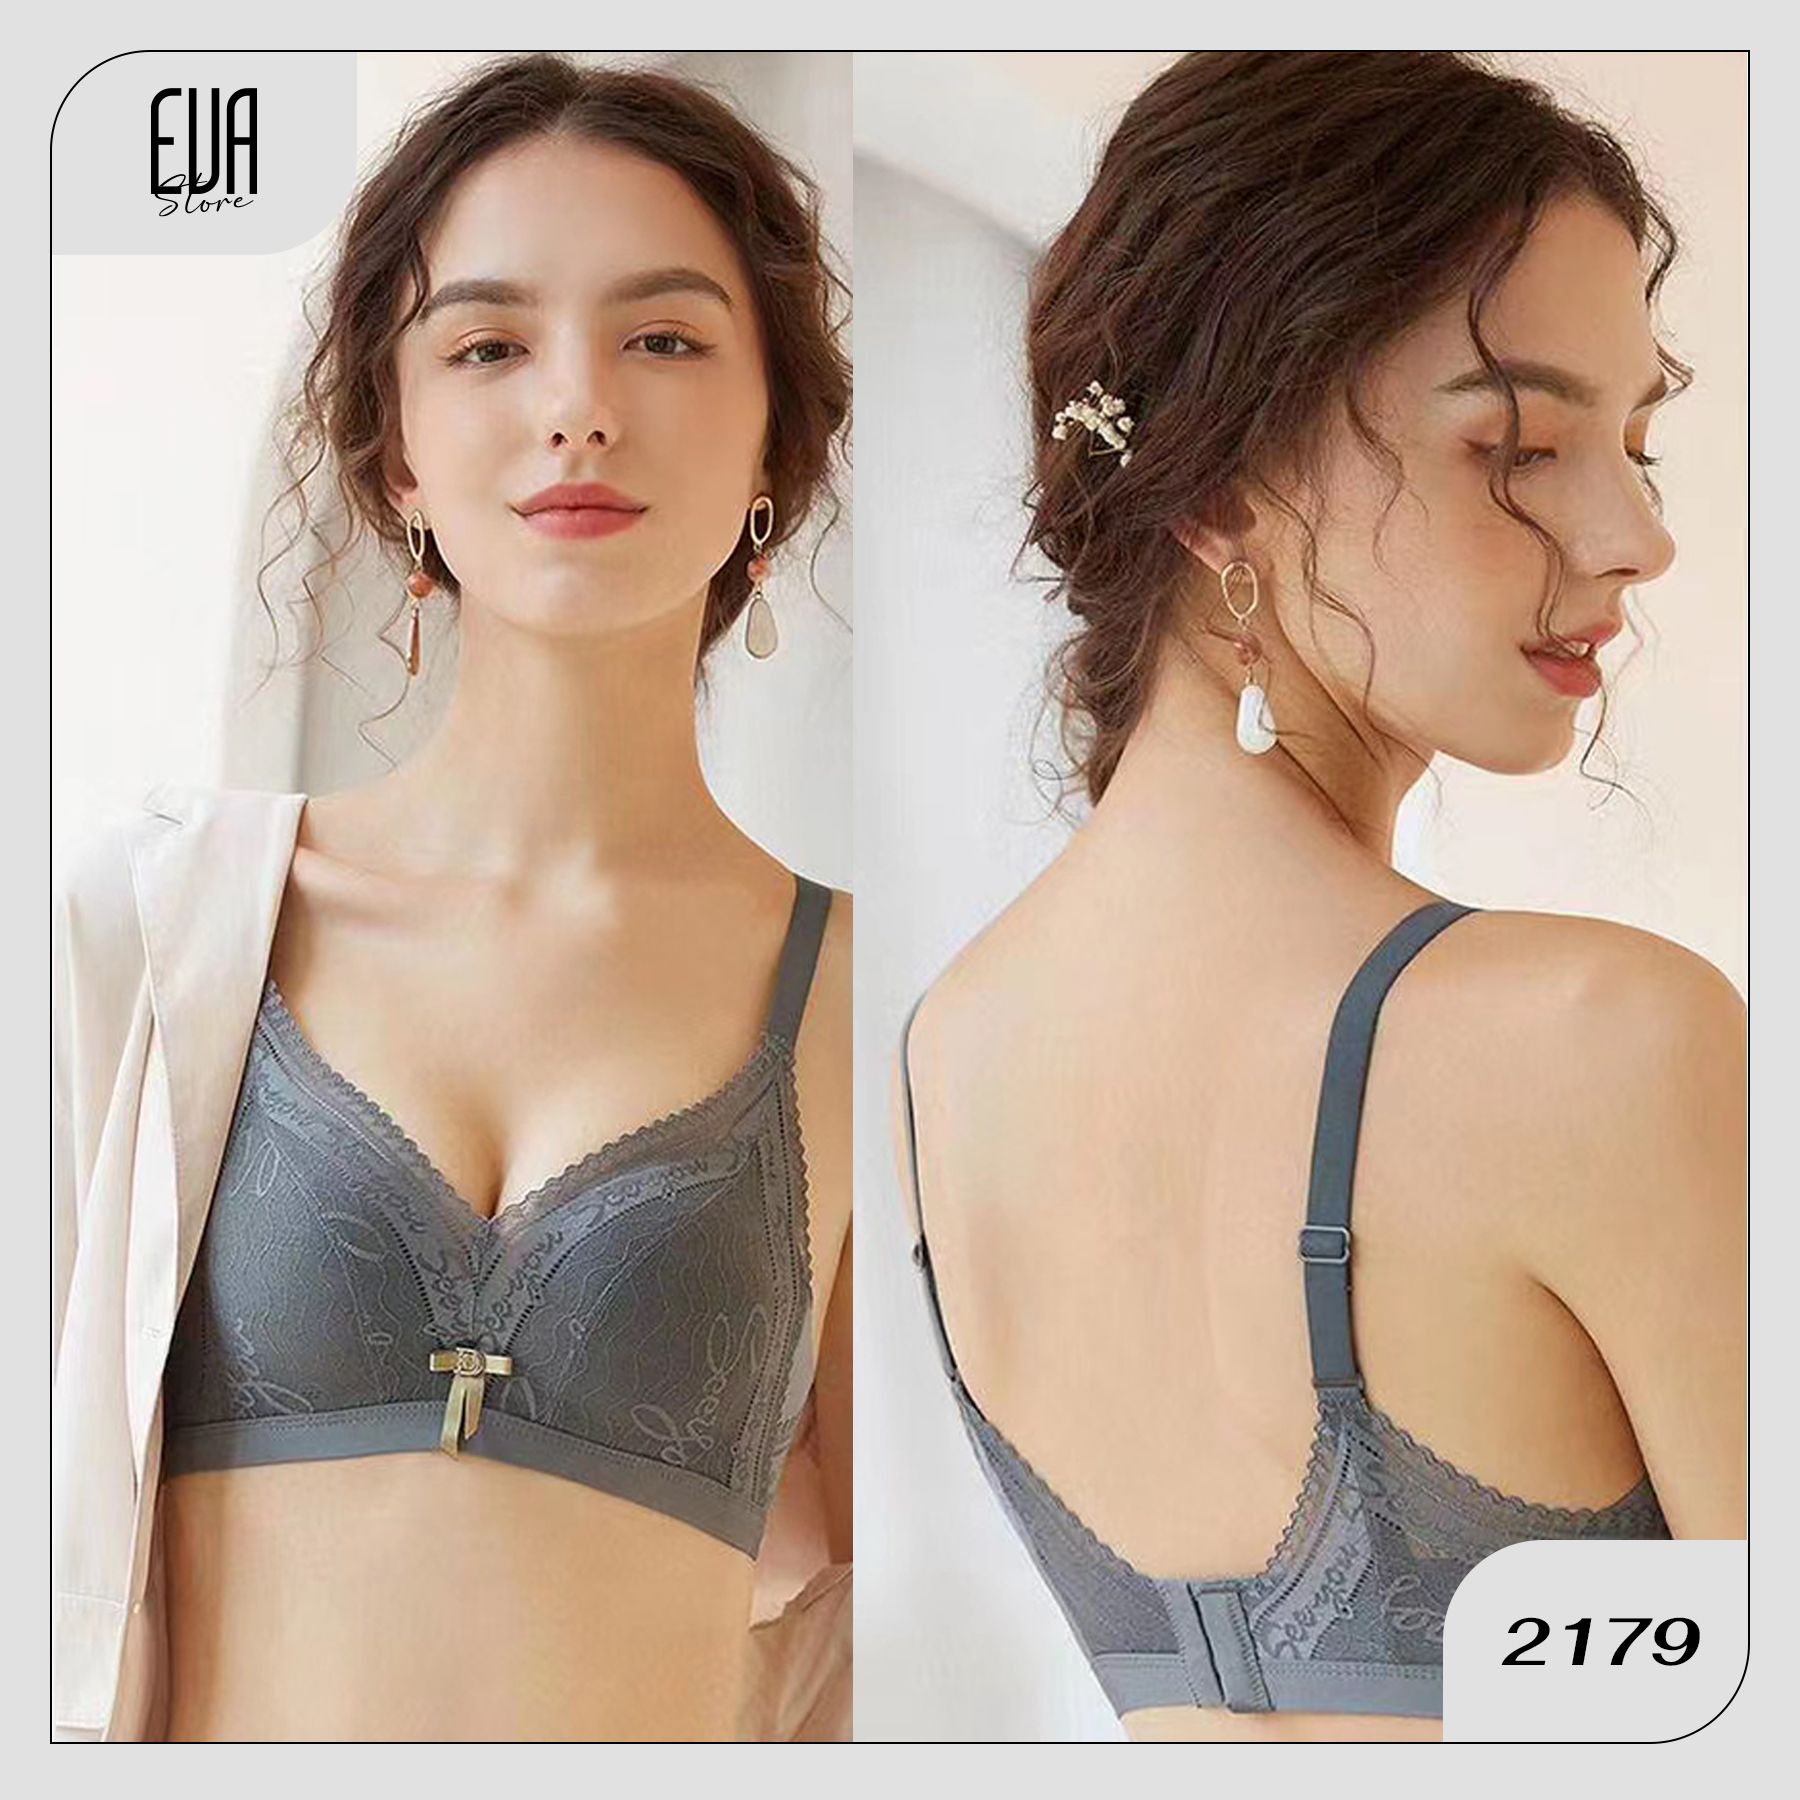 What Is The Difference Between A Contour Bra And A Push-up, 50% OFF